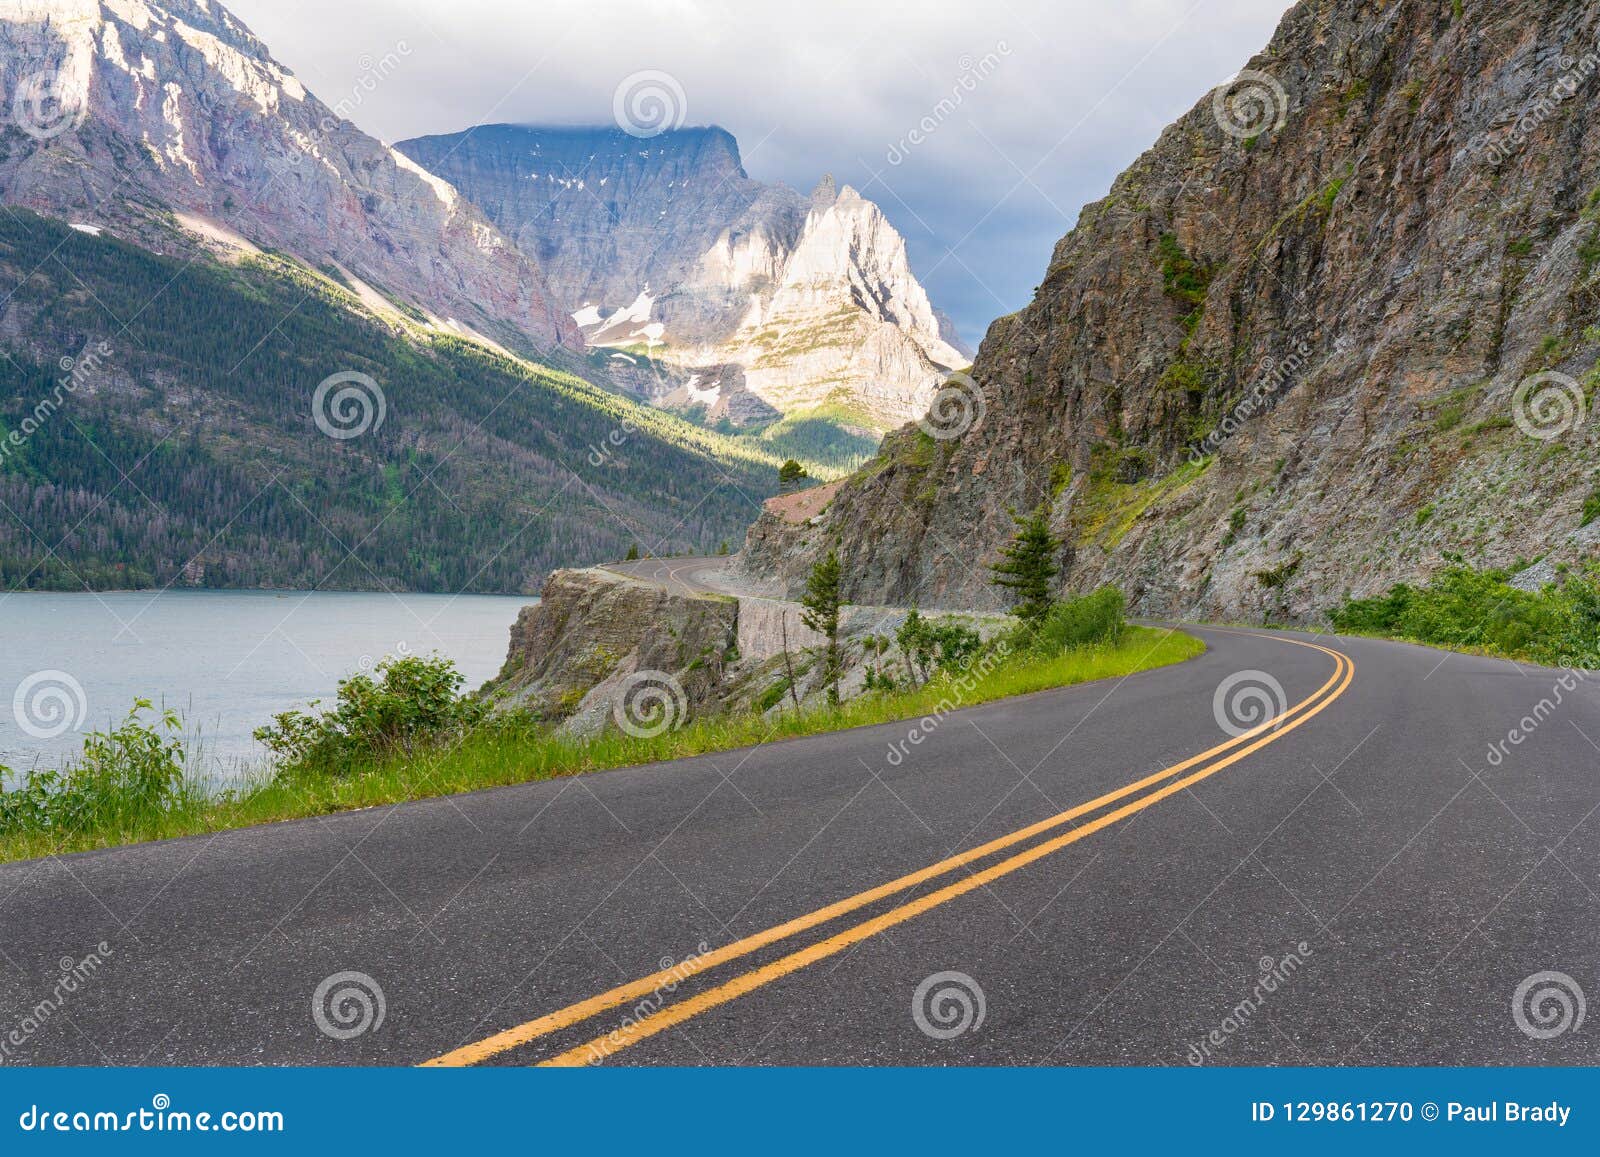 going to the sun road, montana